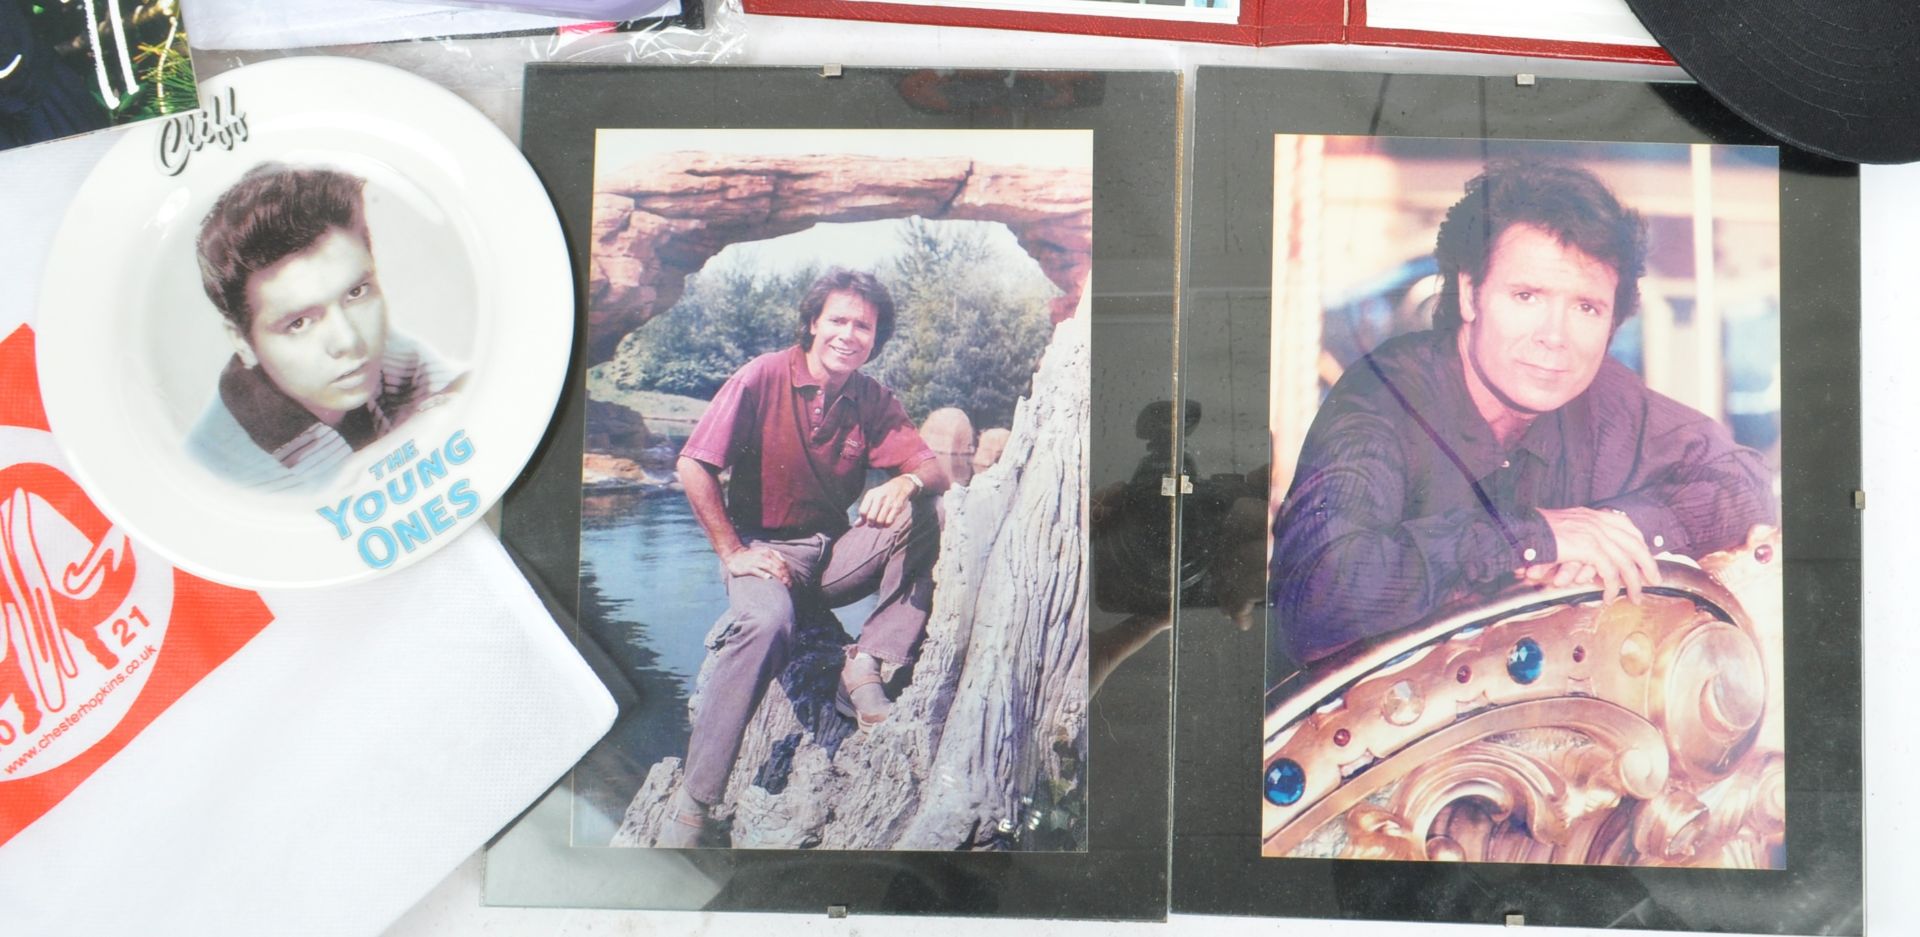 SIR CLIFF RICHARD - LARGE EXTENSIVE COLLECTION OF MEMORABILIA - Image 4 of 7